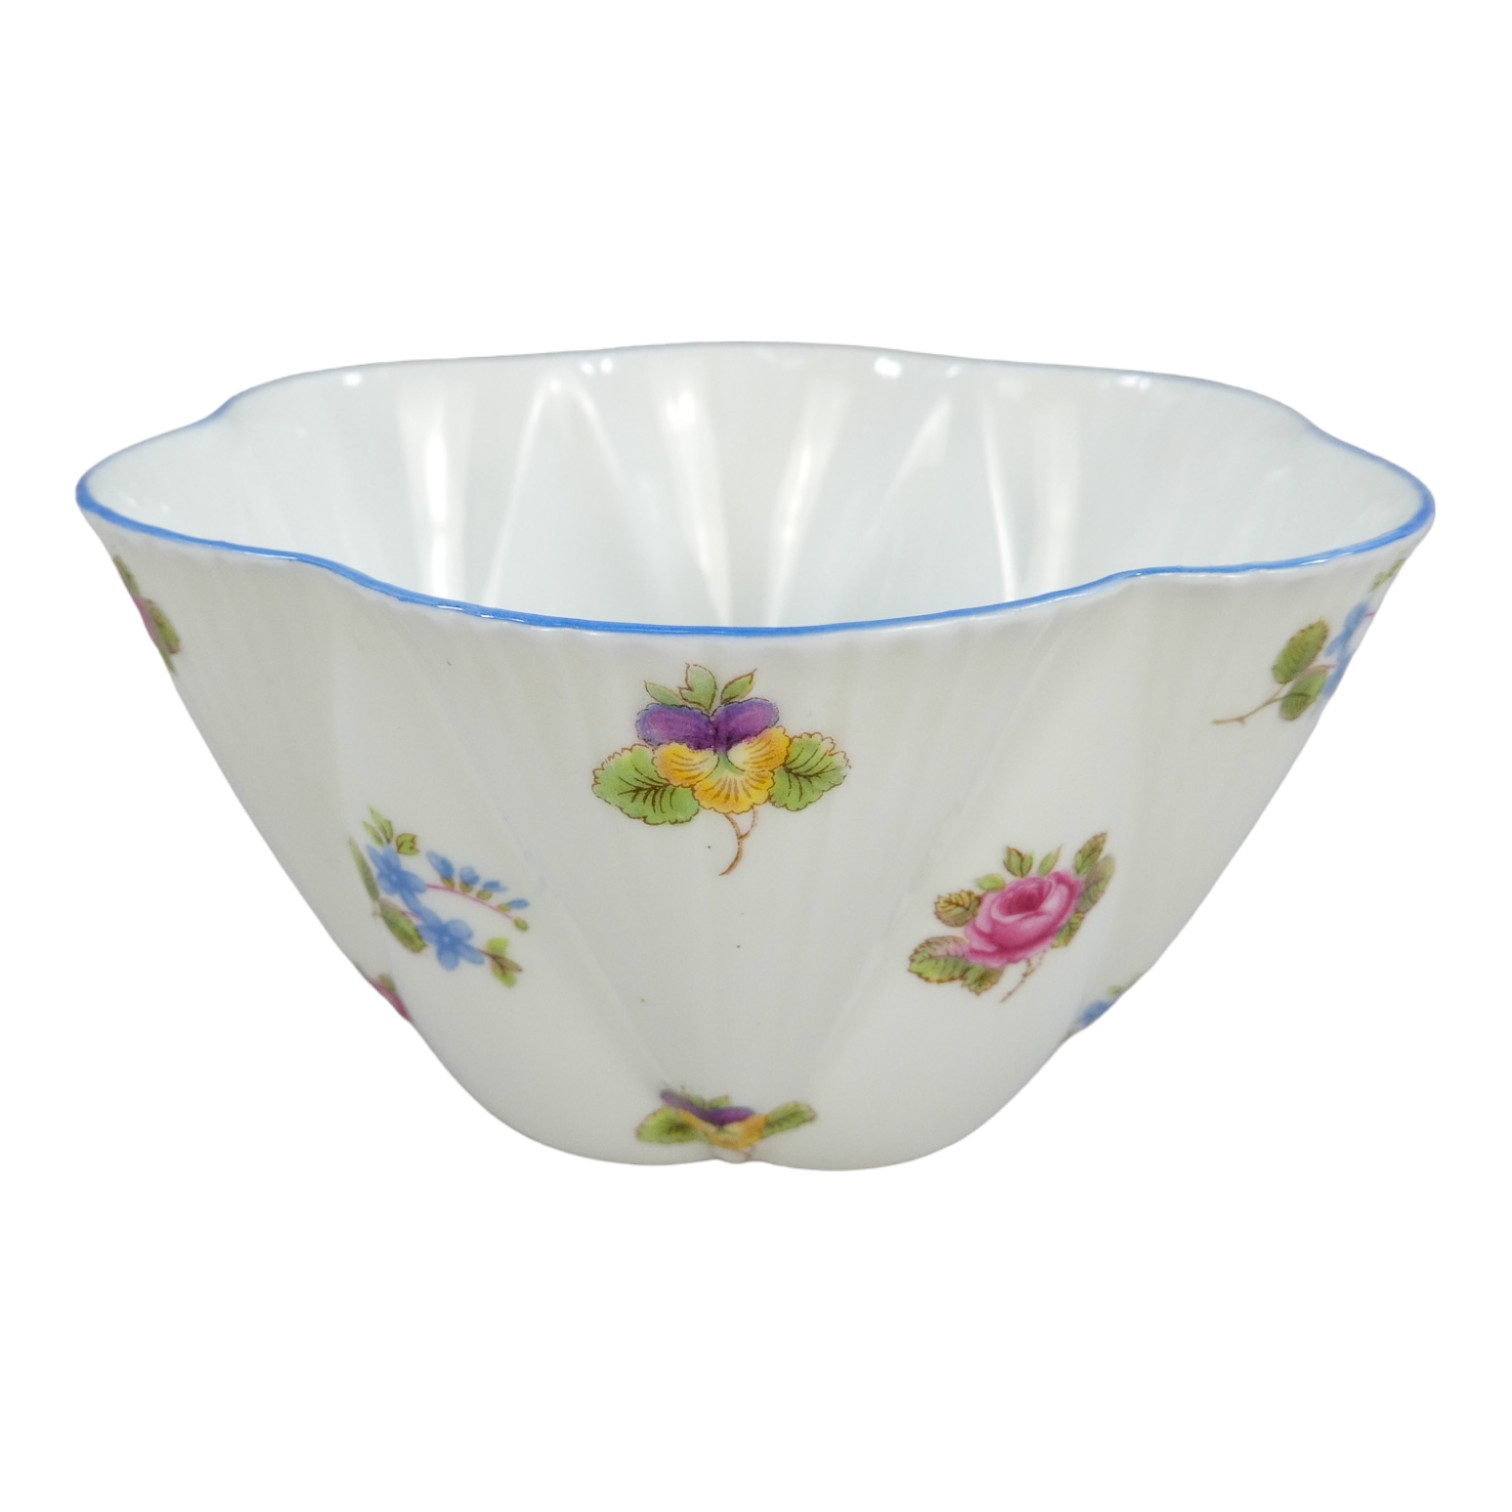 A mid 20th century Shelley tea service - decorated with floral sprigs and light blue details, a - Image 5 of 6